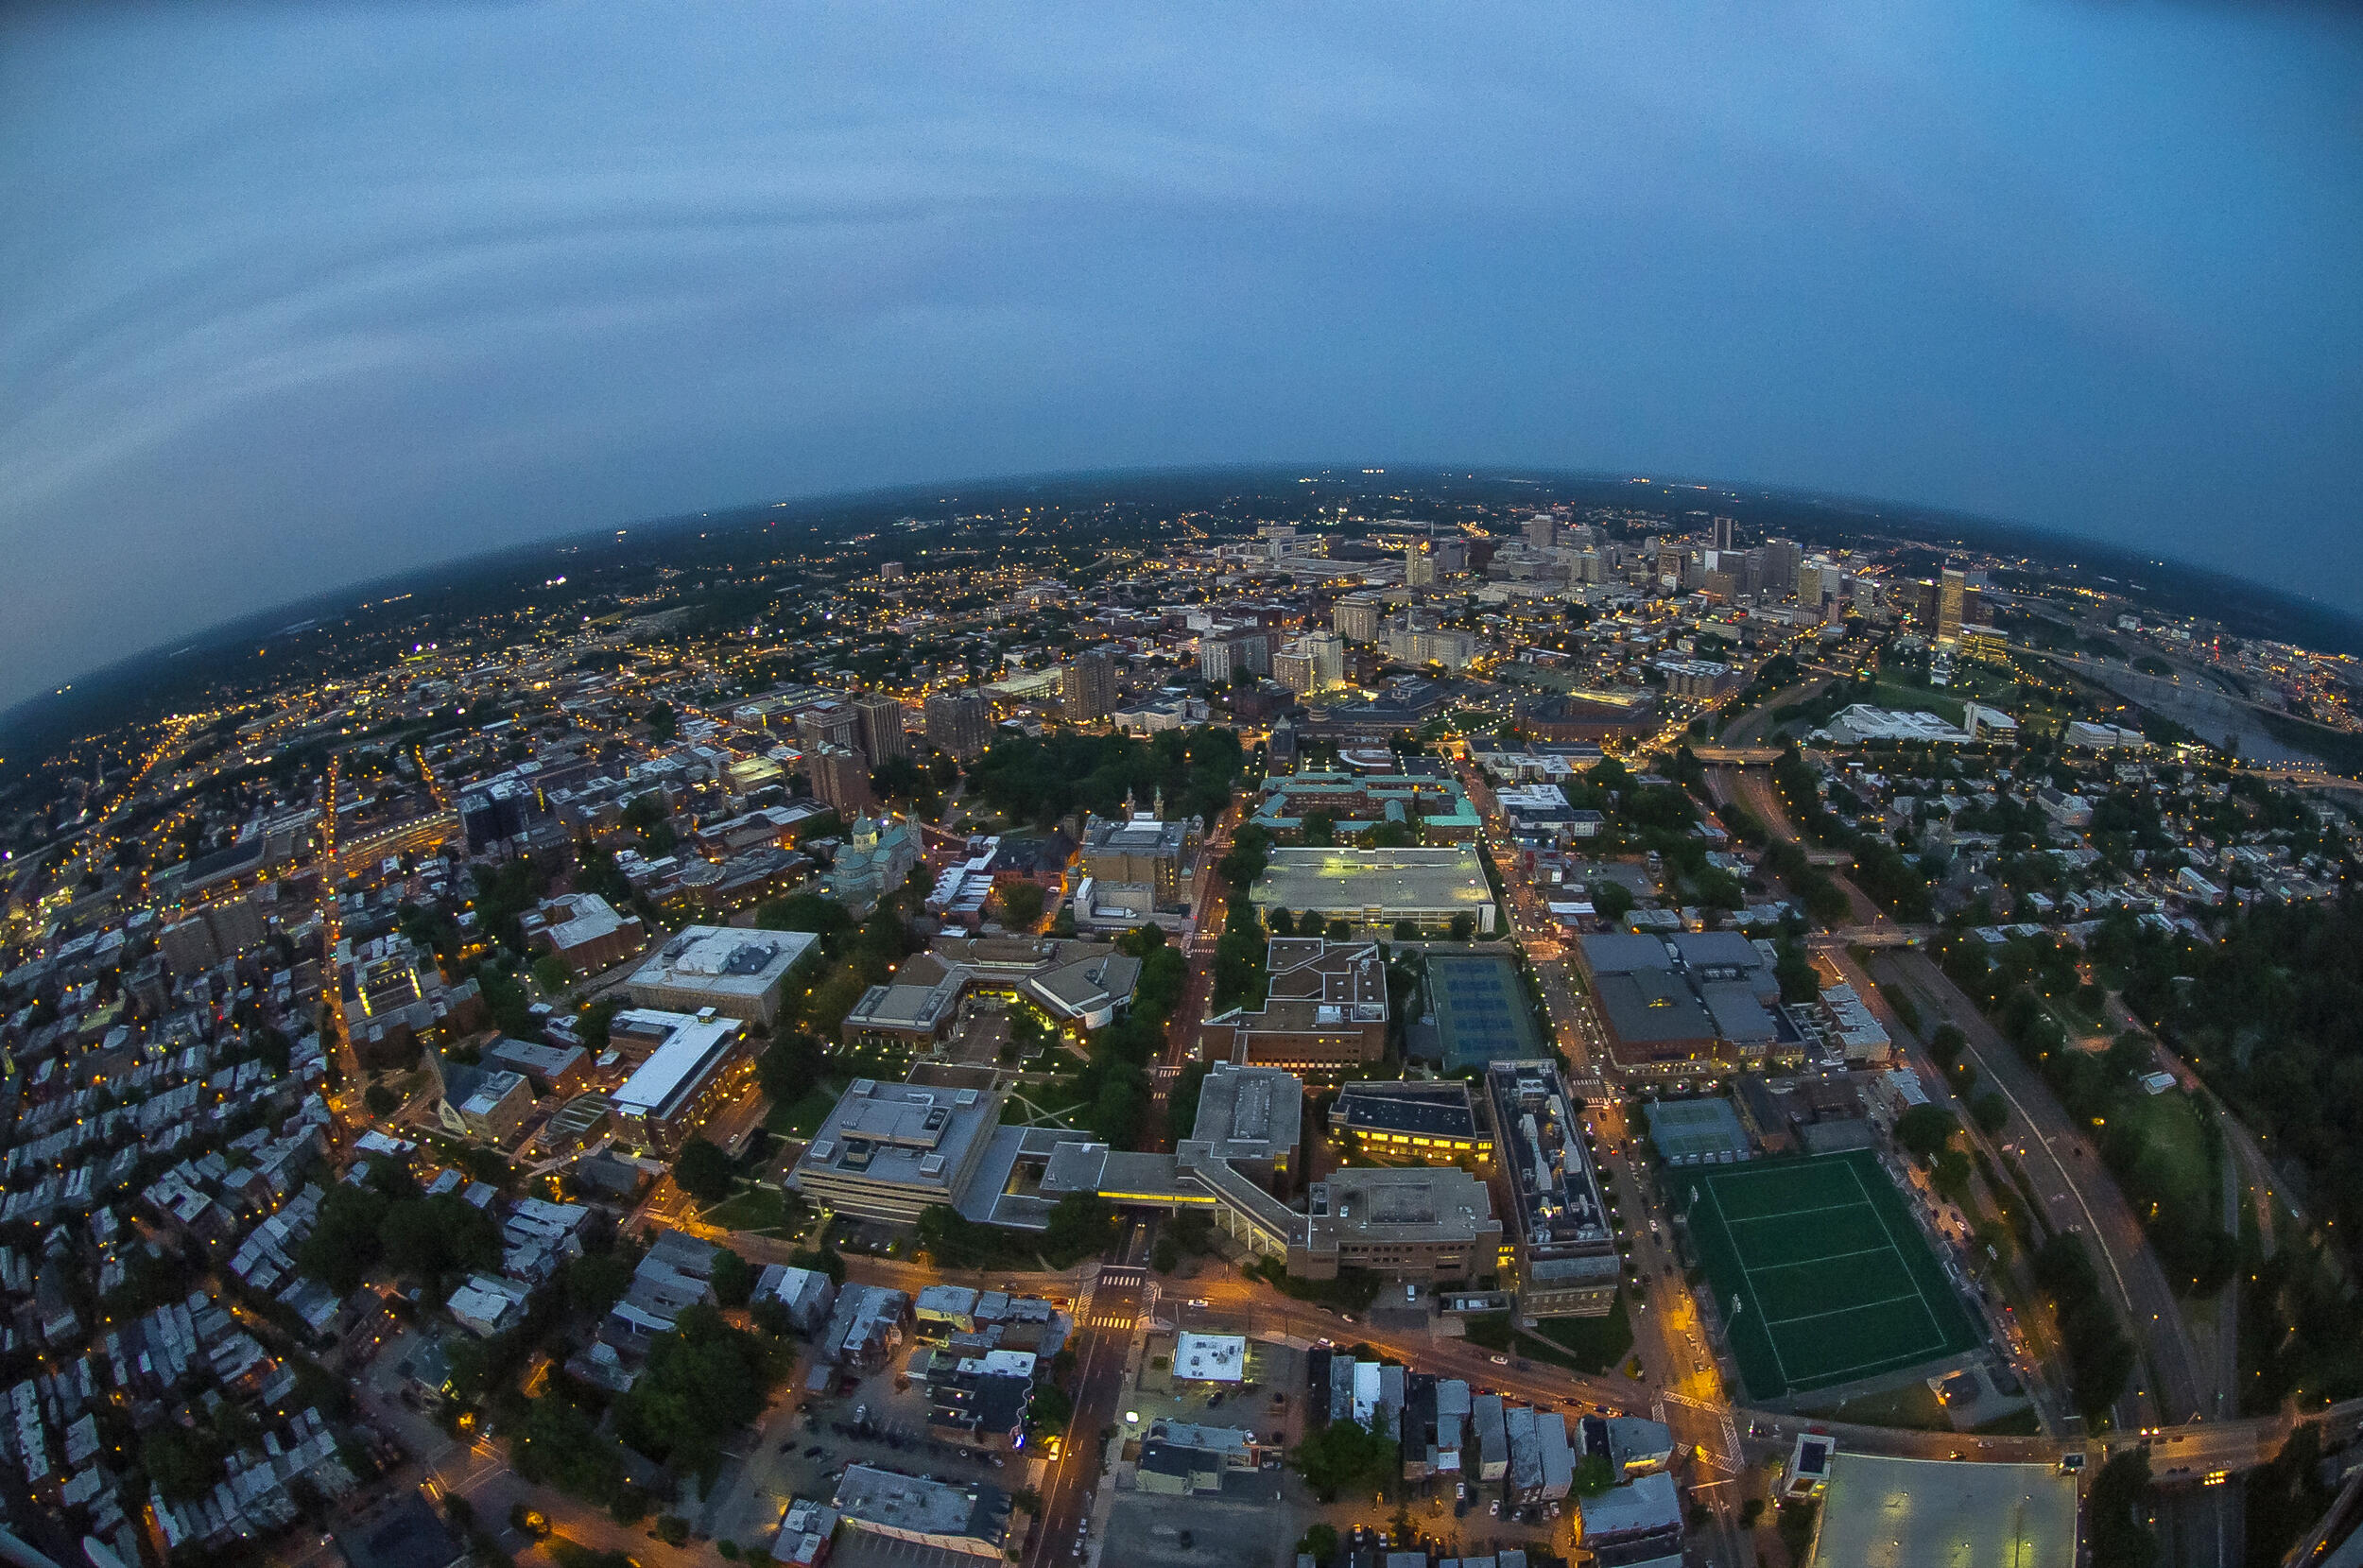 An Arial view of the city of Richmond at dusk, with a dark sky and the city street lights on 